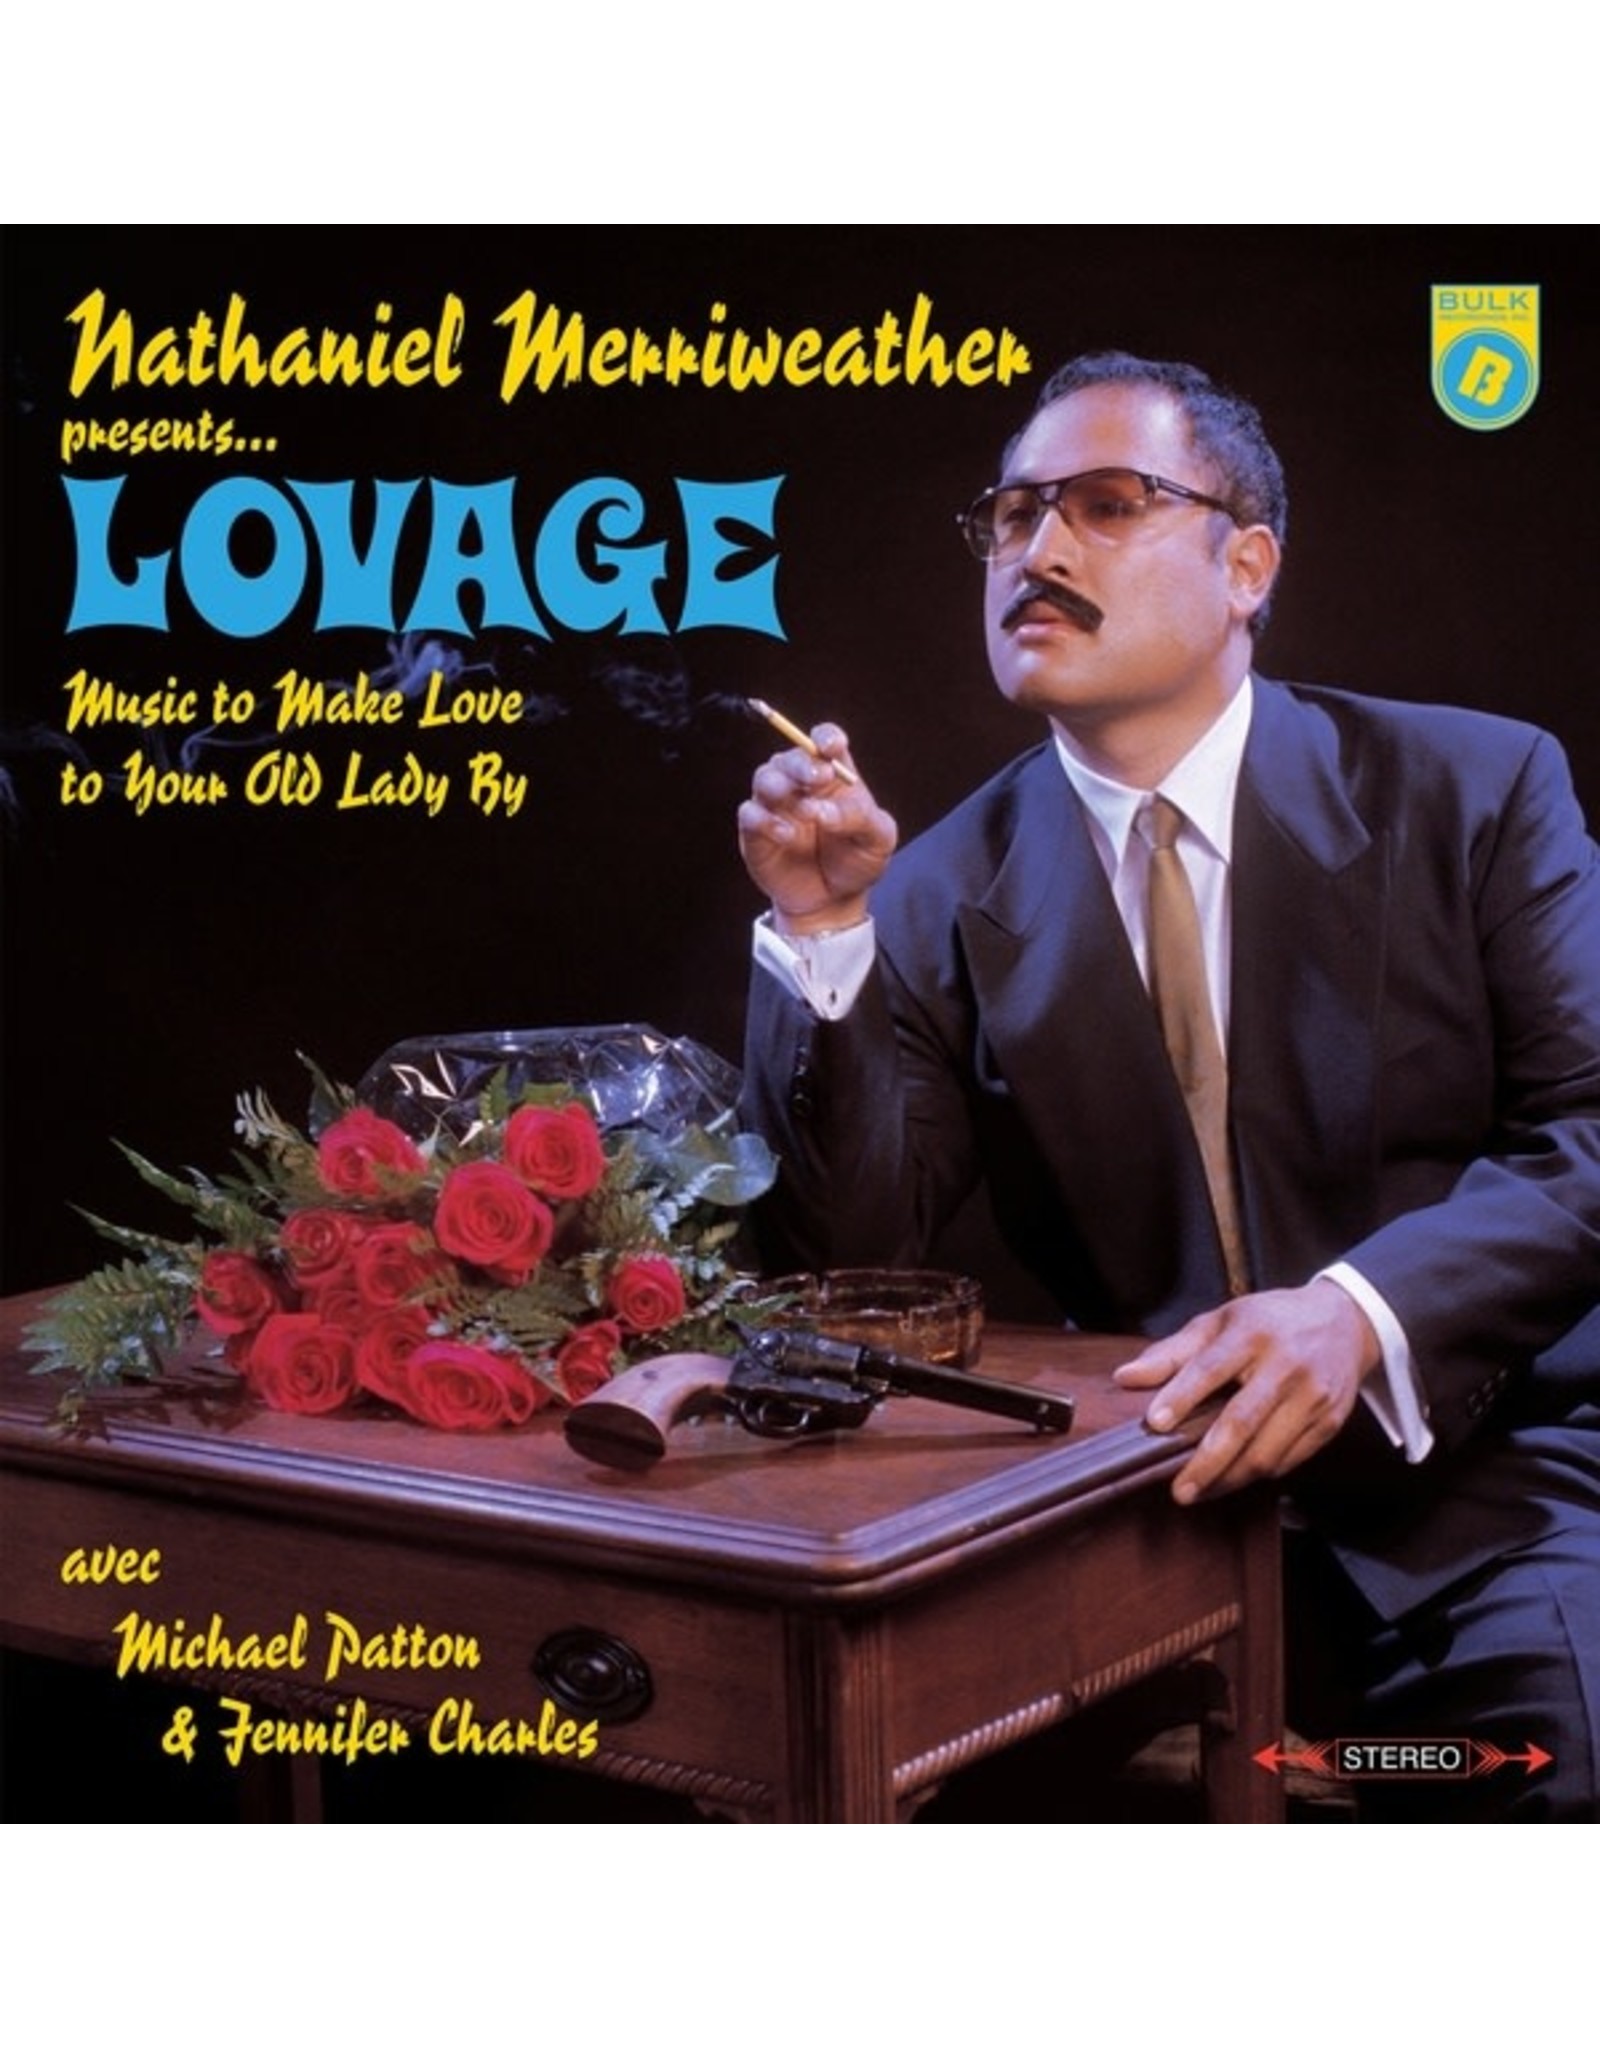 Lovage: Music To Make Love To Your Old Lady By LP